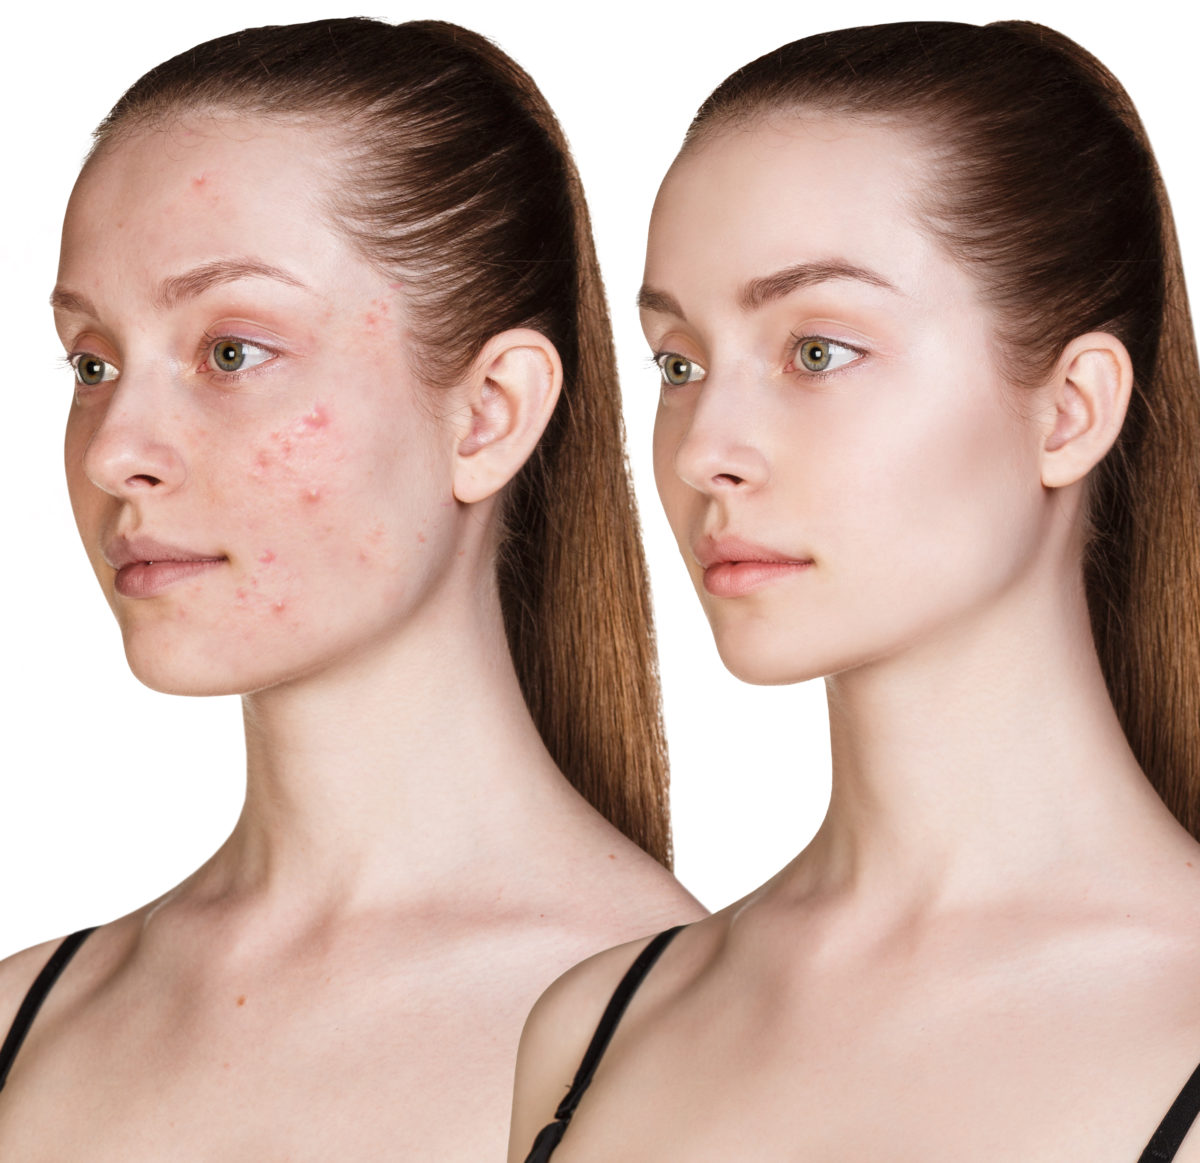 School’s Out for Summer: How to Get Ahead of Adult Acne